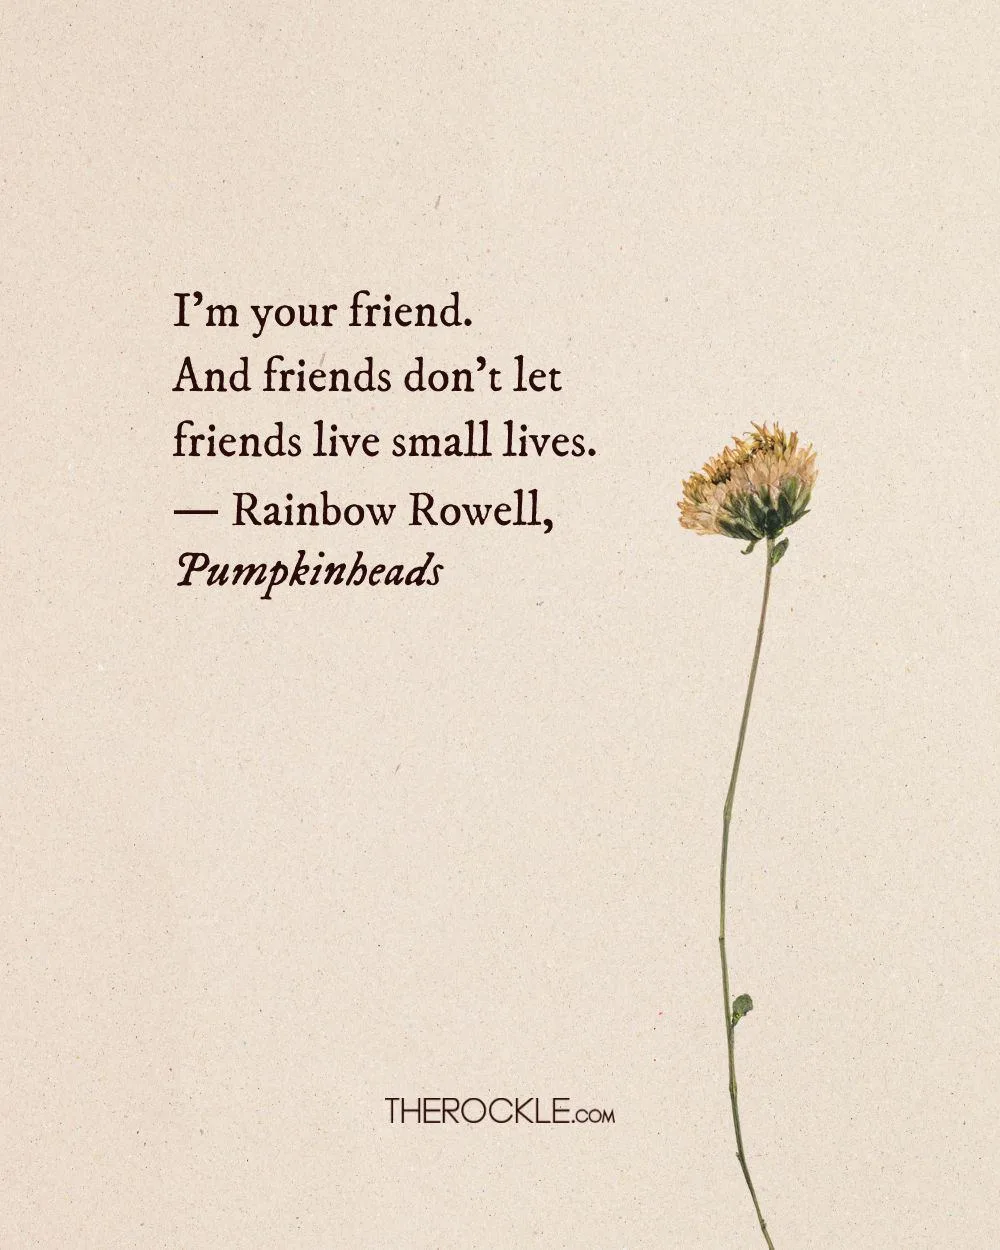 Rainbow Rowell on friendship and encouragement